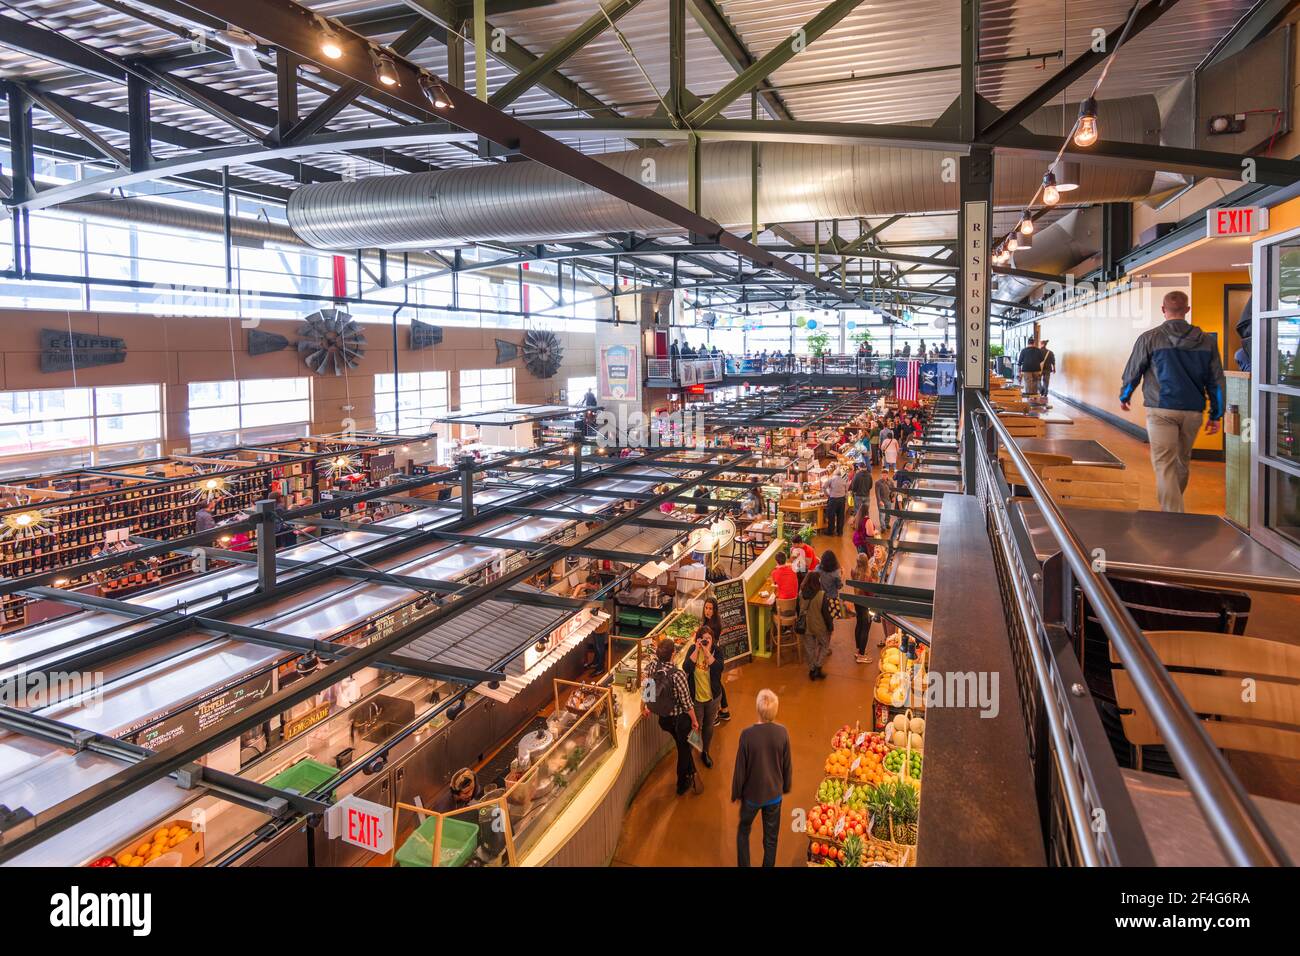 MILWAUKEE, WISCONSIN - MAY 19, 2018: Shoppers in the interior of Milwaukee Public Market. The market opened in 2005. Stock Photo